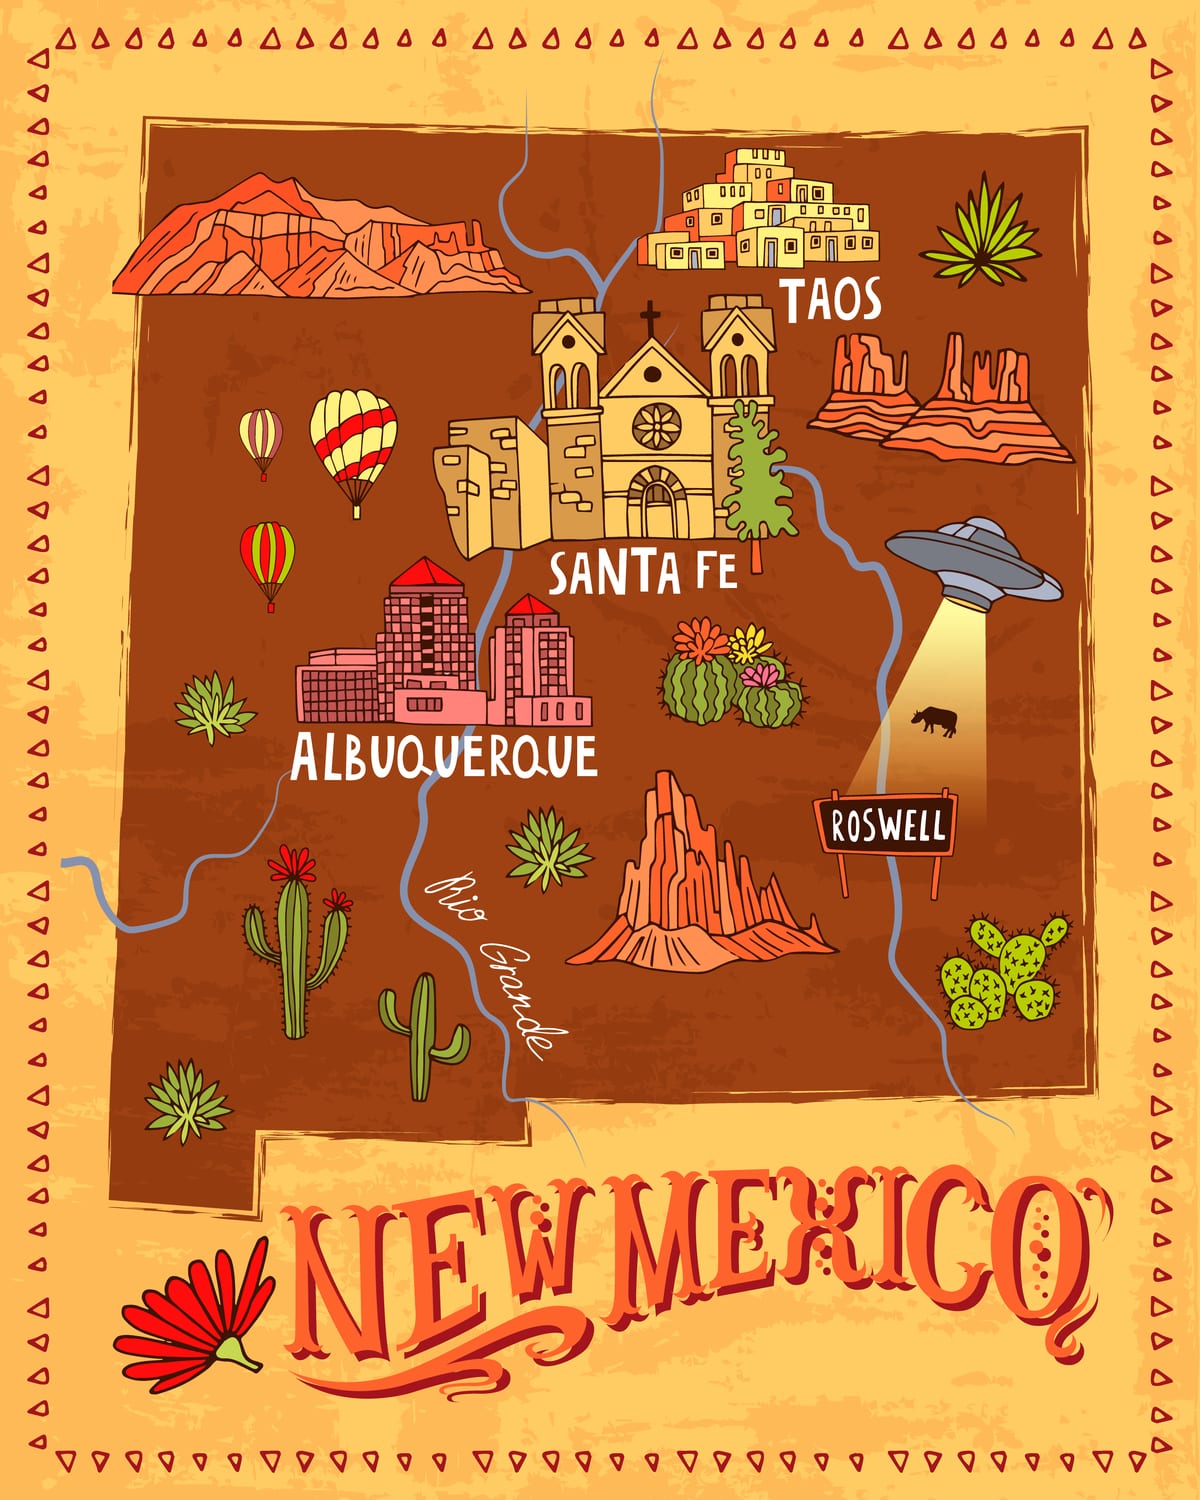 illustrated tourist map of New Mexico, USA. Travel and attractions